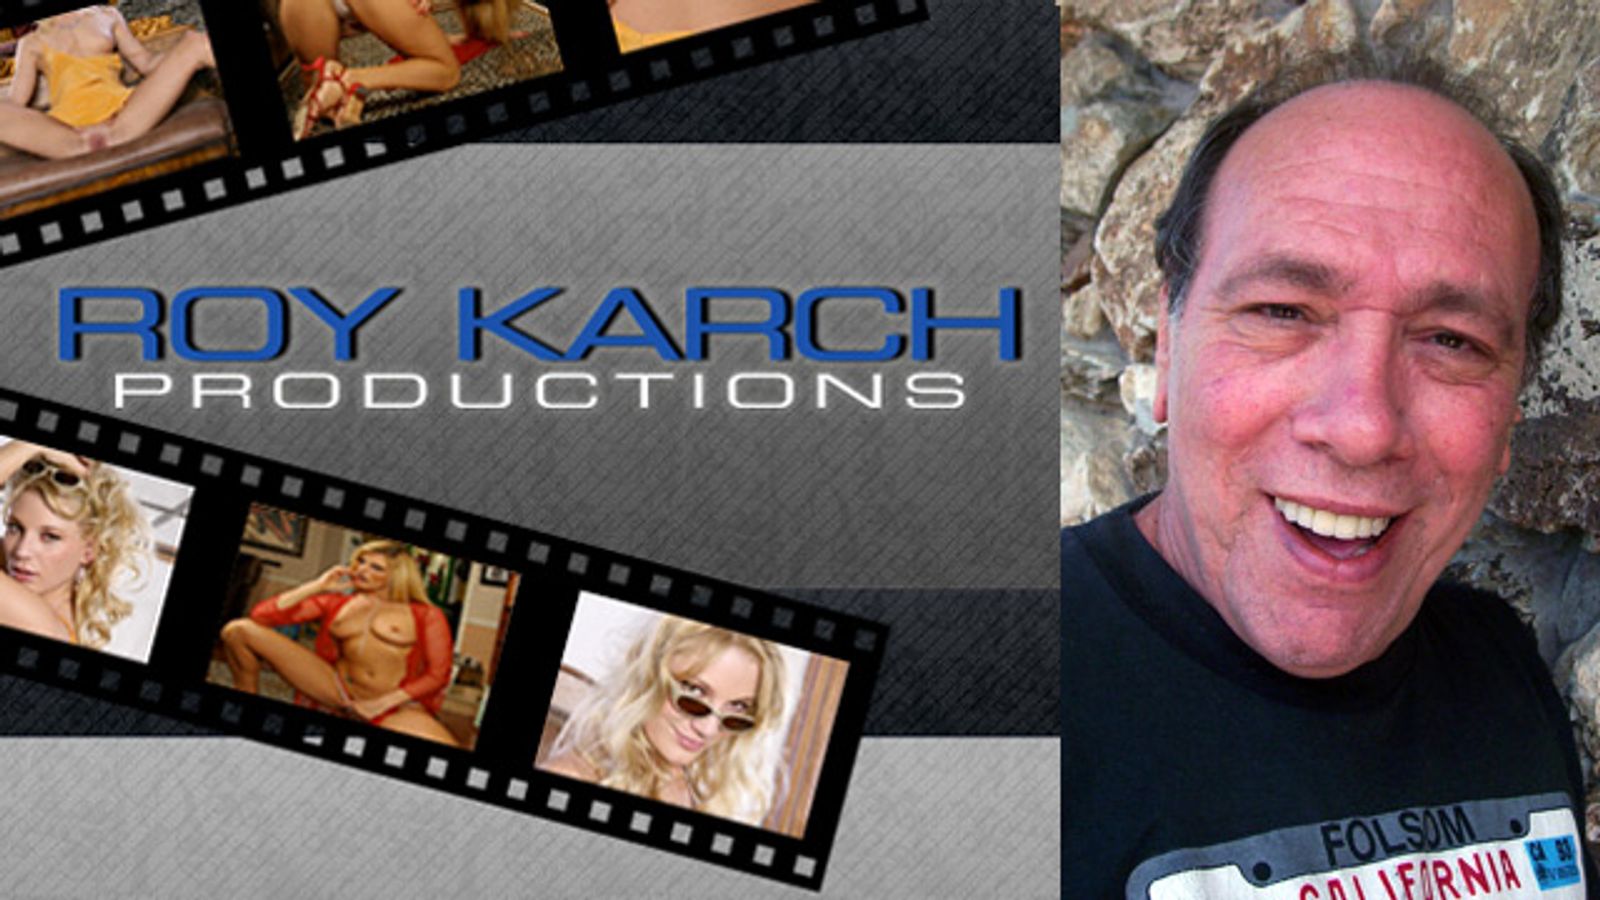 Director Roy Karch Launches Website RKPadult.com